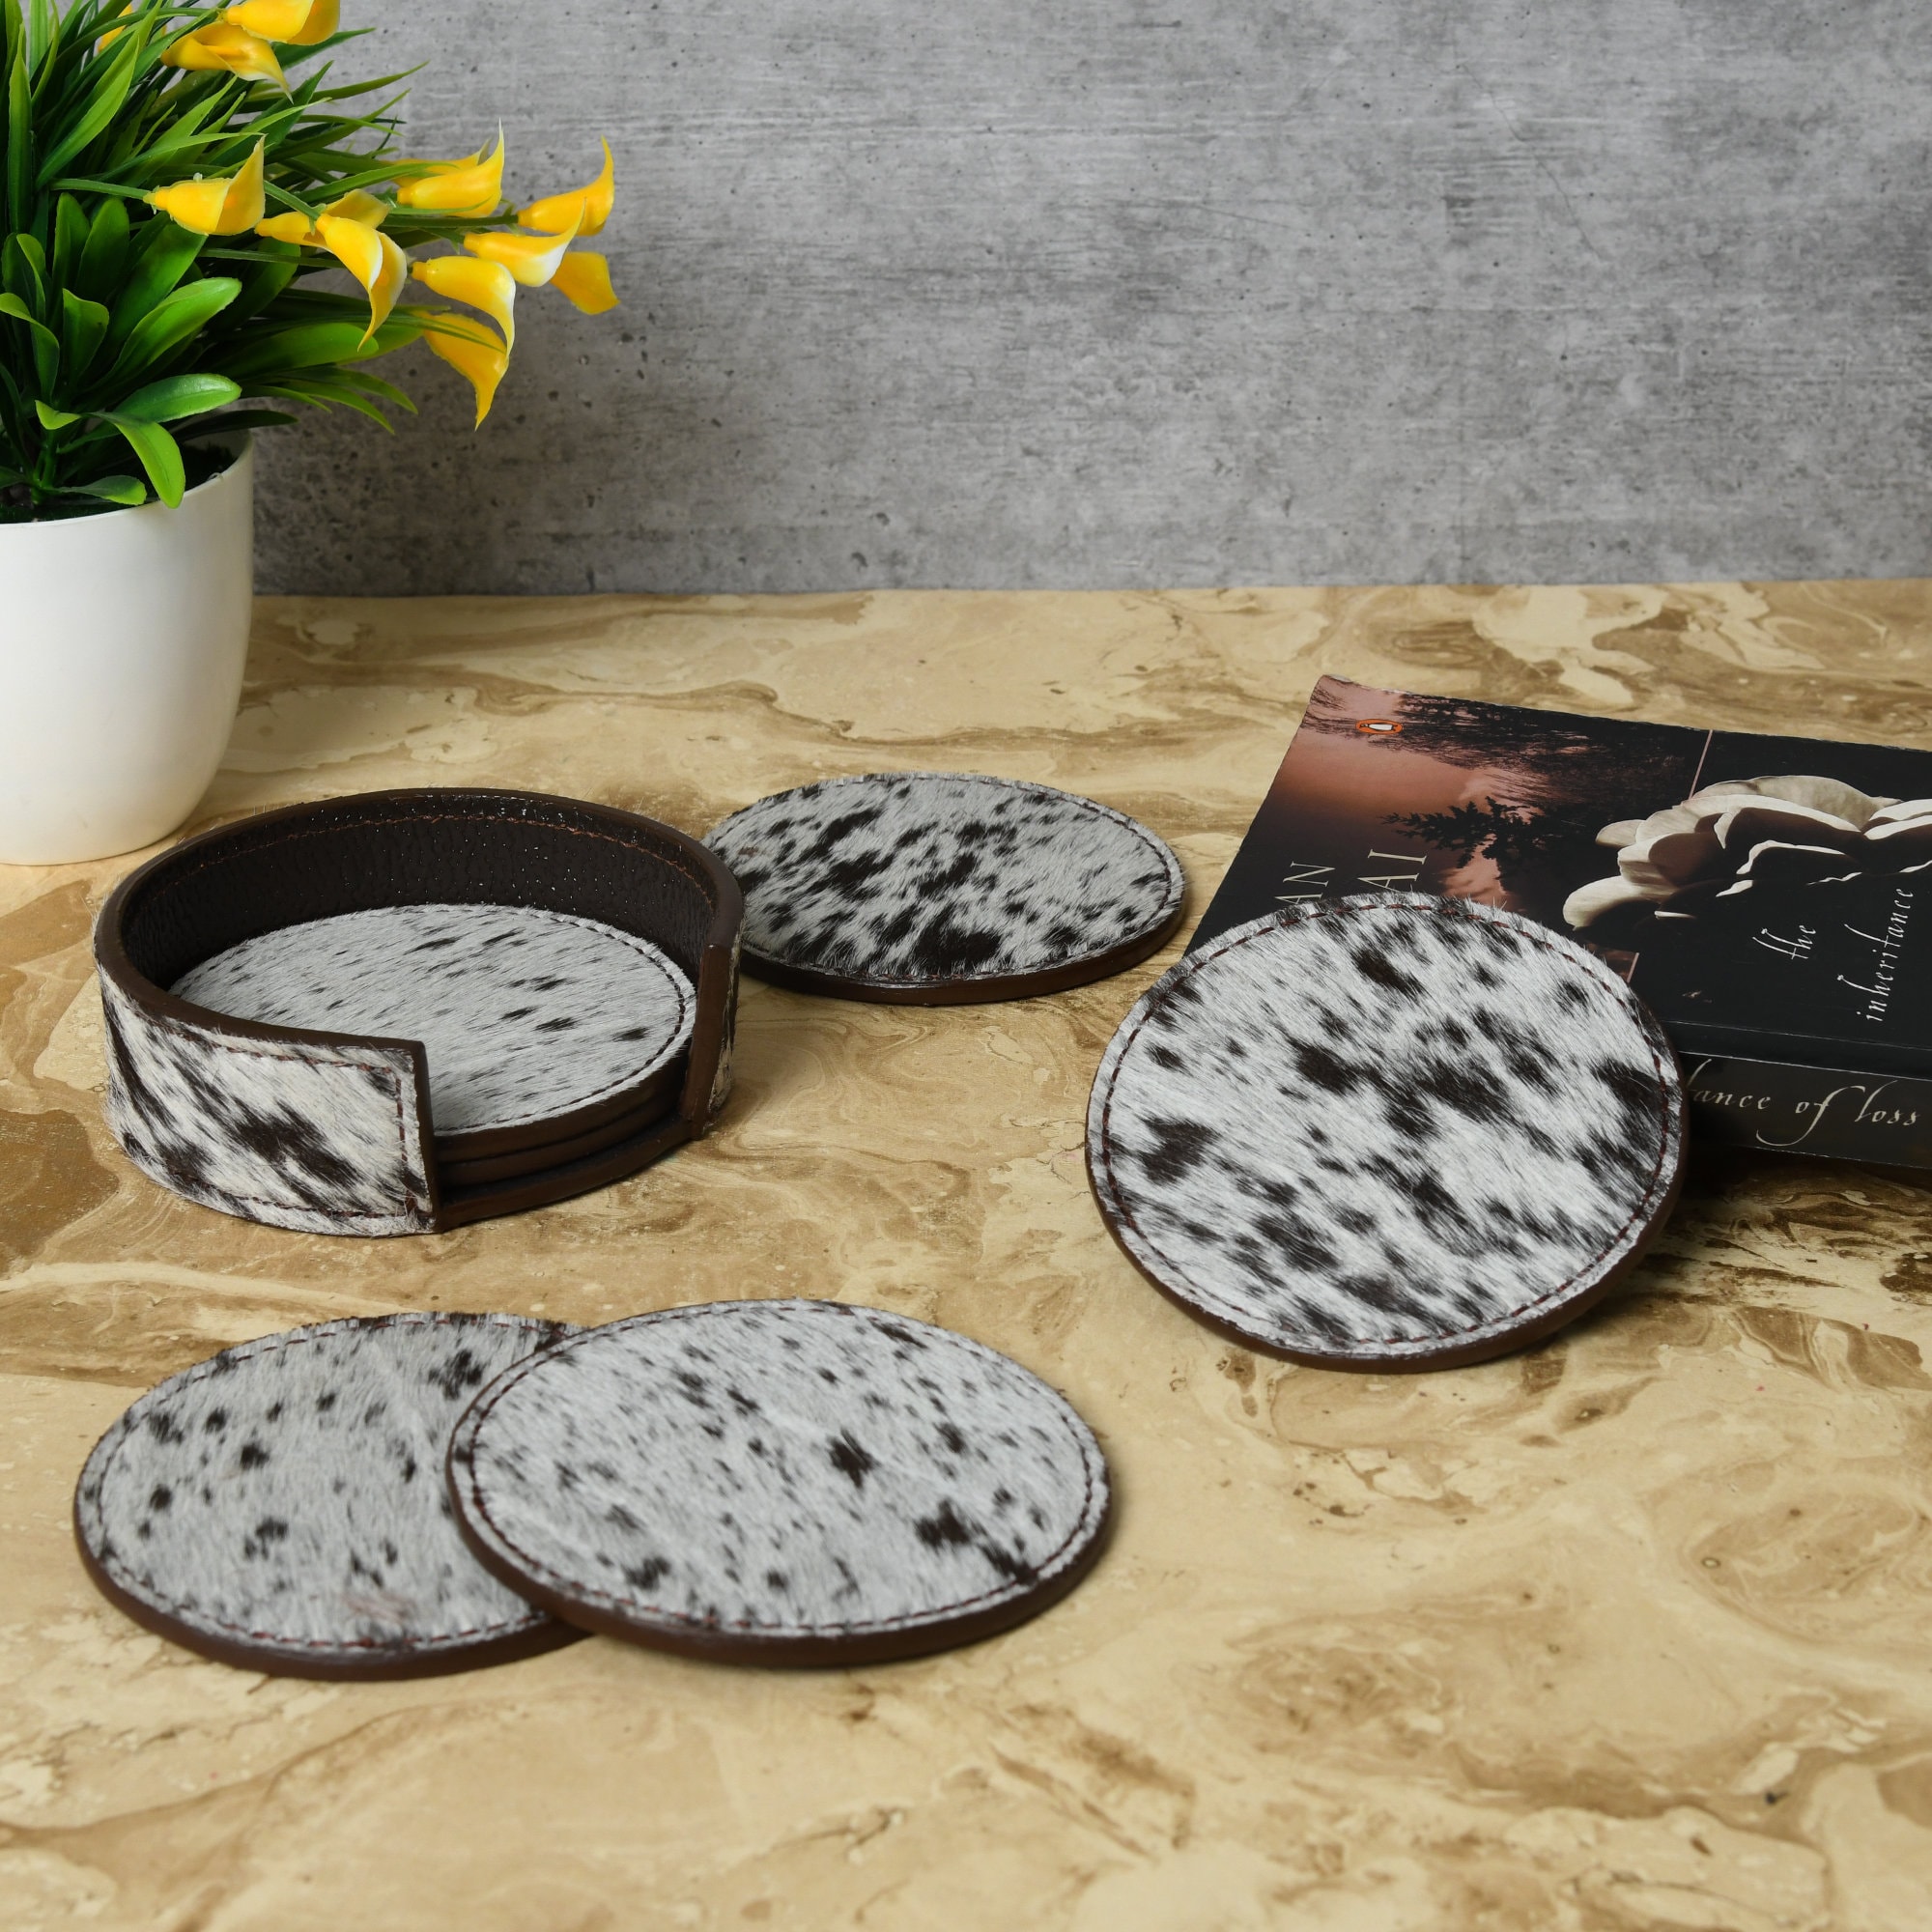 NGF Cowhide Coaster Set of 6 Pcs Natural Cowhide Drink Coasters Hair on Square Coasters Leather Tea Cup Coasters Home Decor & Home Living Ideas